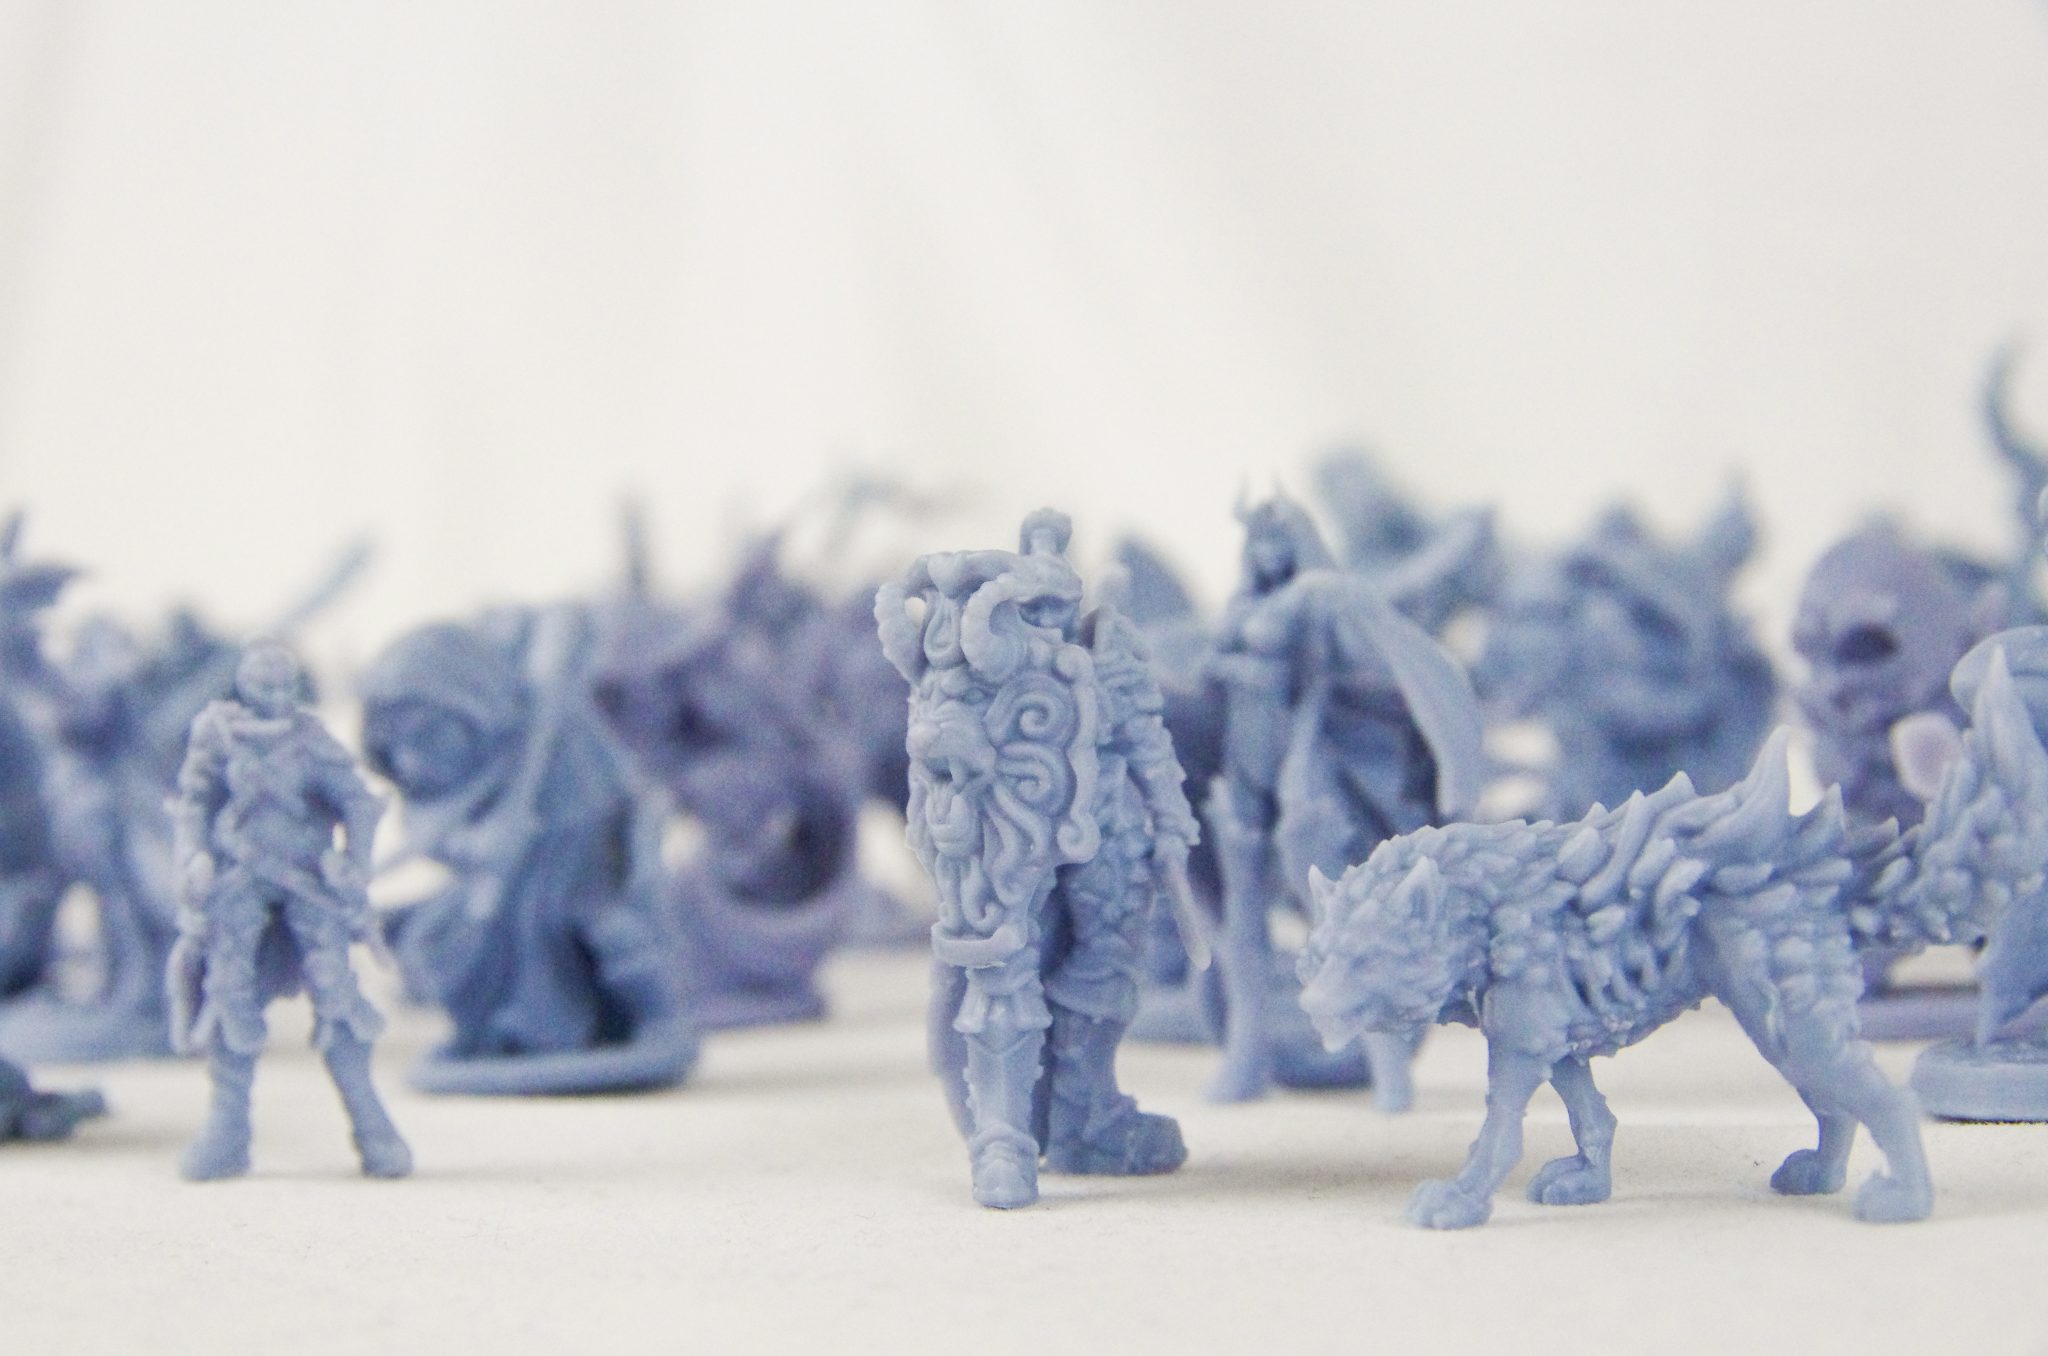 MyMiniFactory 3DPrinted & Delivered miniatures. Photo via MyMiniFactory.